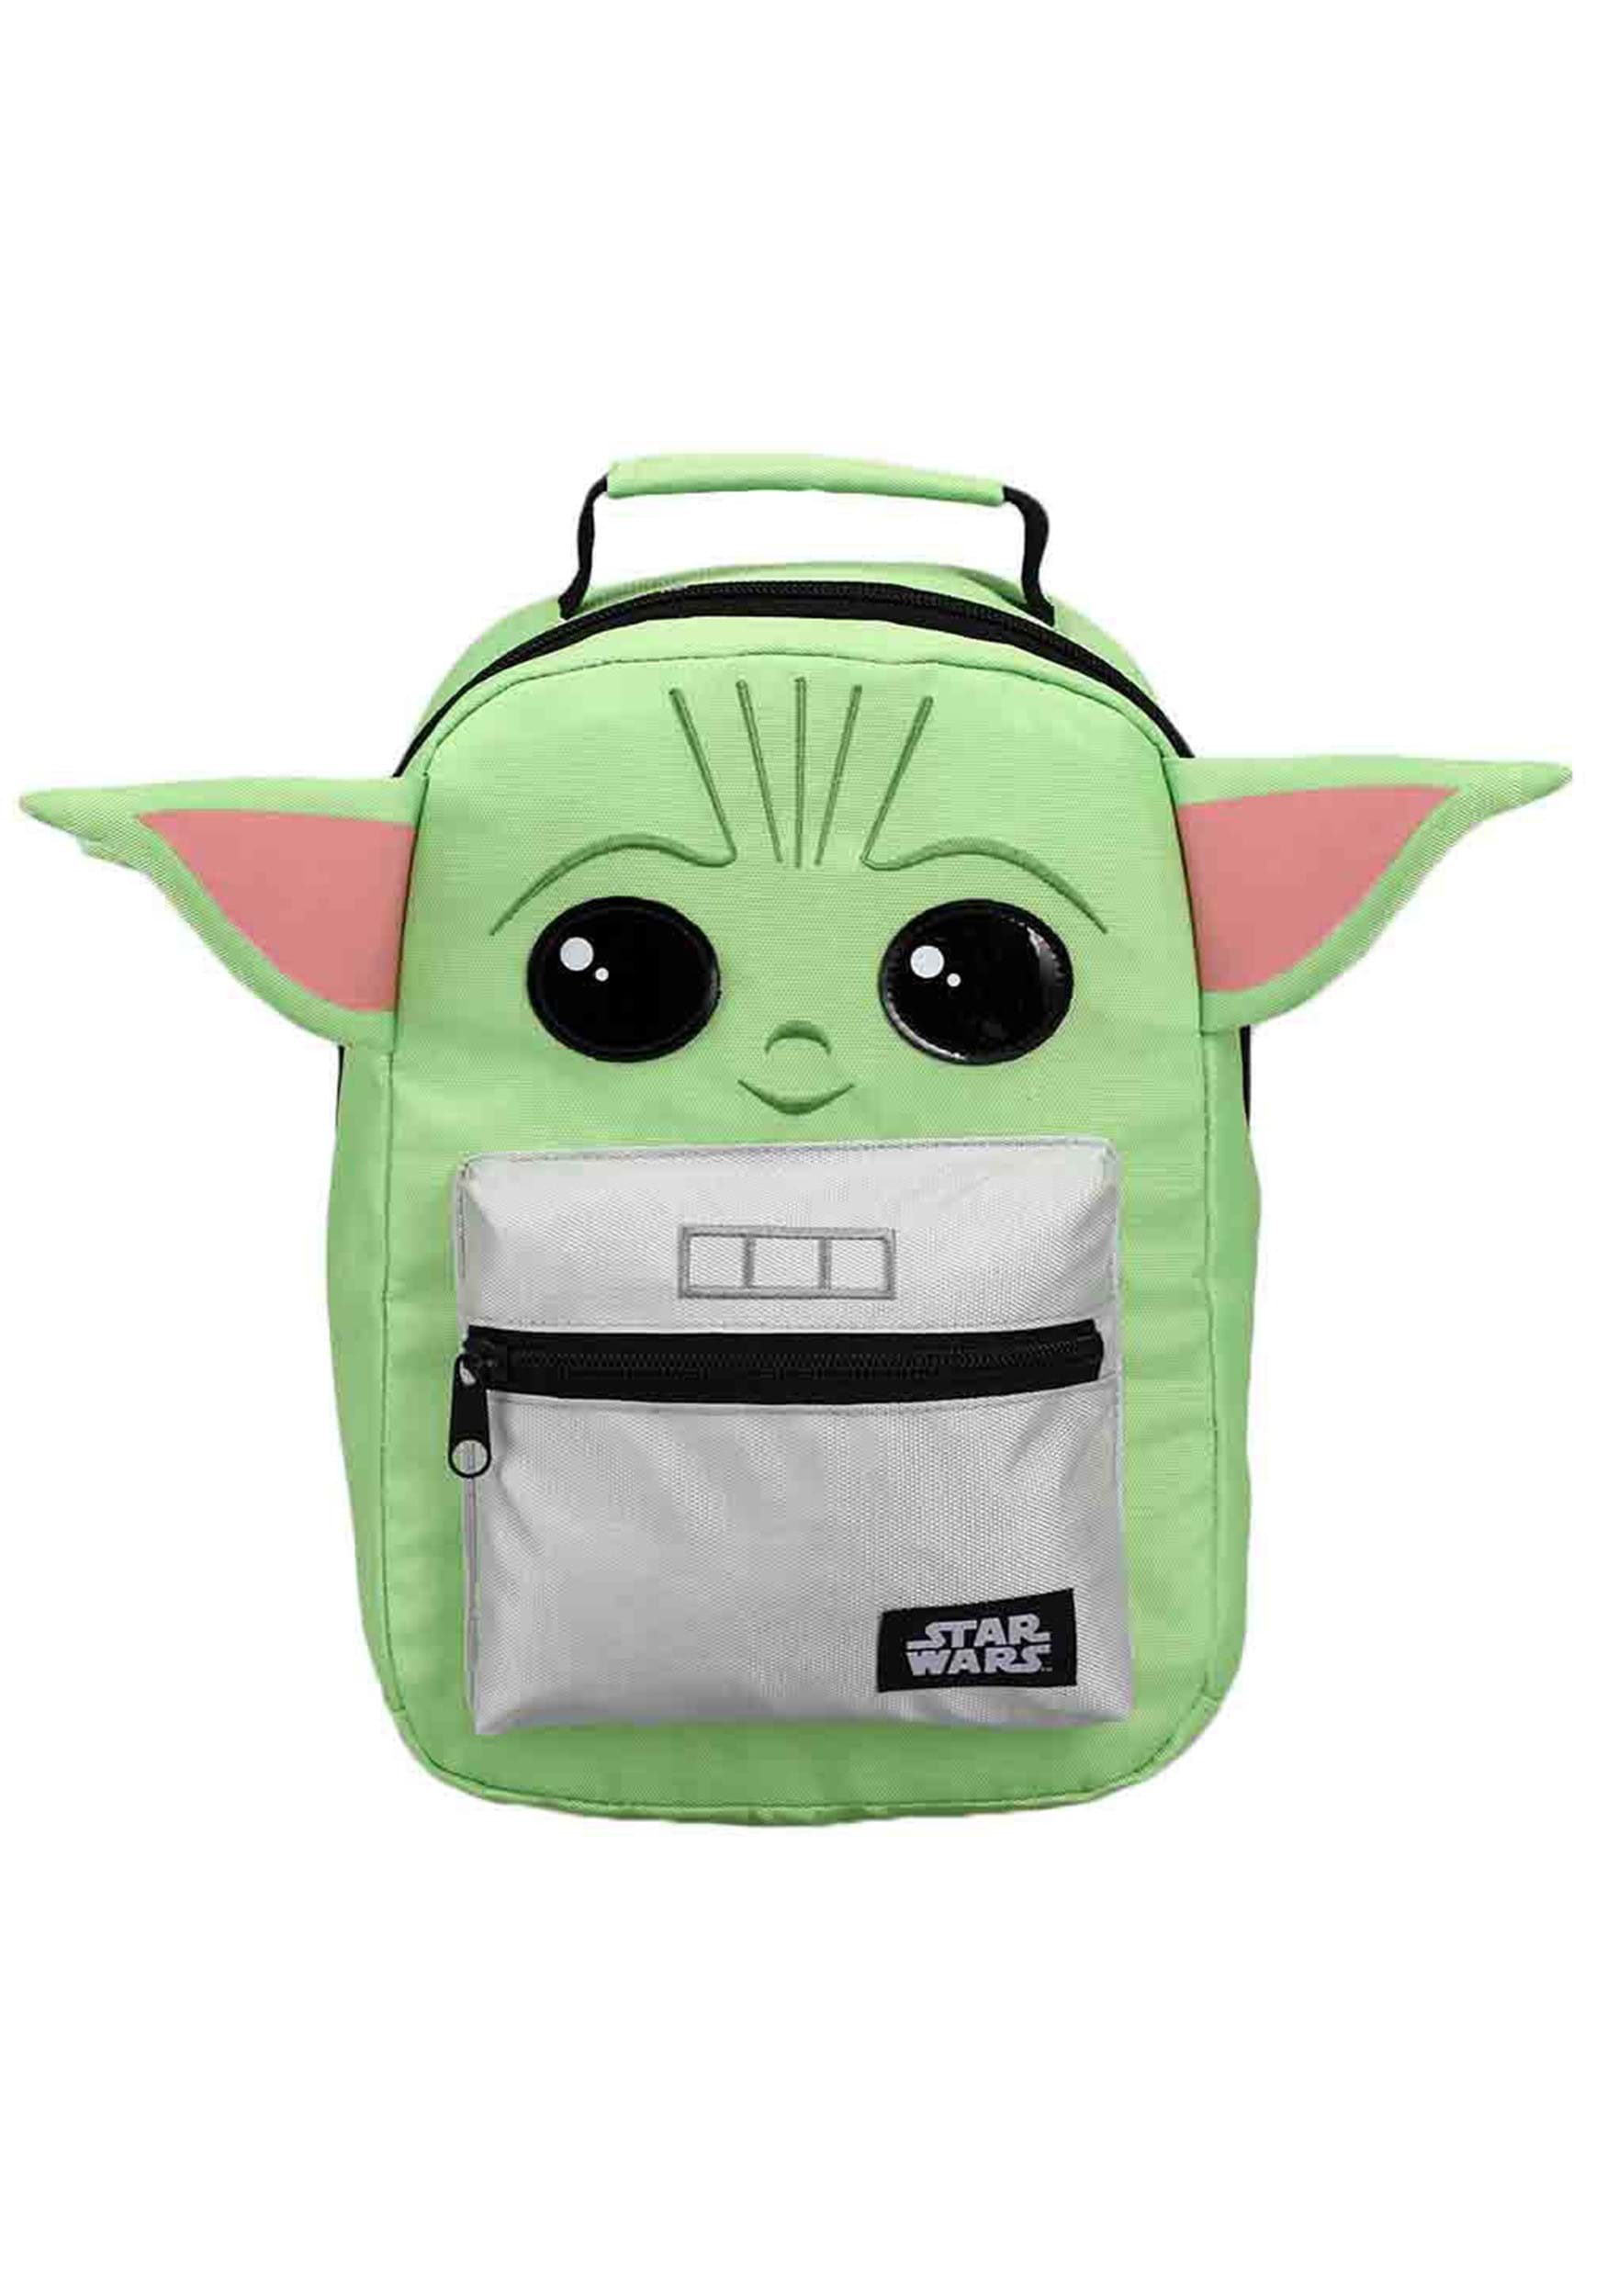 Star Wars Grogu Insulated Lunch Tote from The Mandalorian